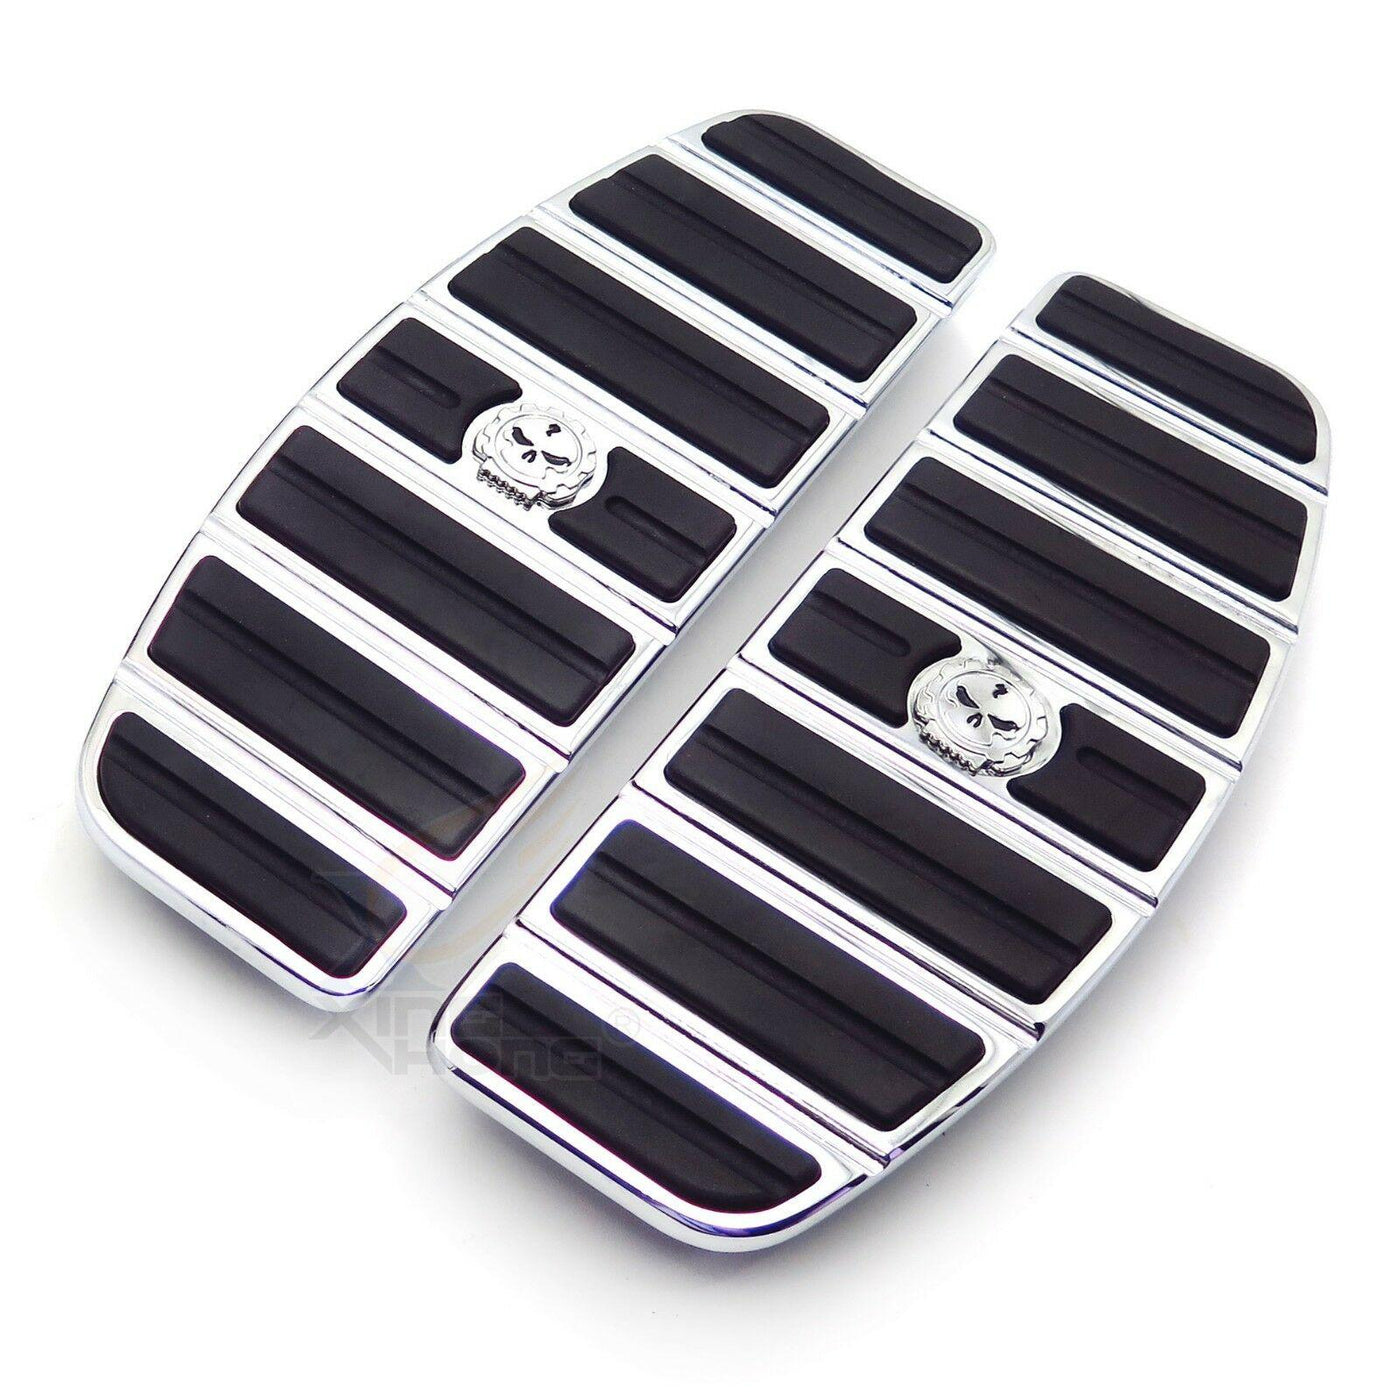 Motorcycle Chrome Skull Rider Footboard Insert Kit For 1980-up Harley Touring - Moto Life Products